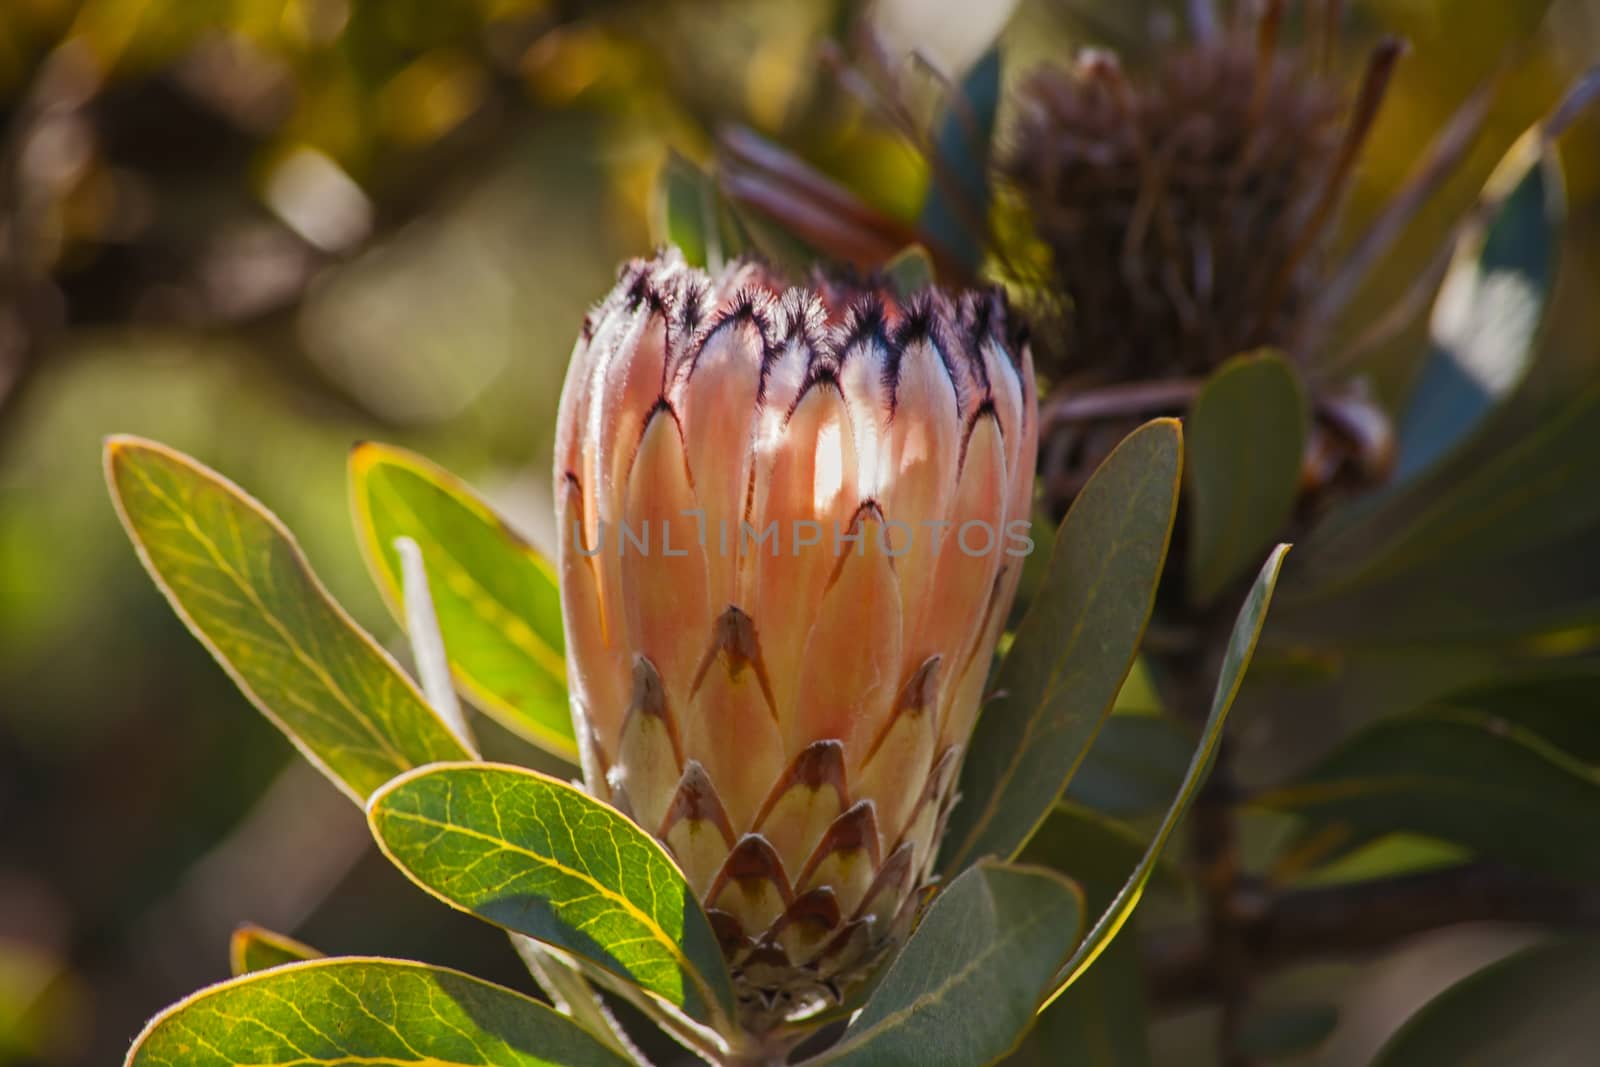 The Protea flower is not a flower, but a flower head or inflorescence, made up of many individual flowers grouped together on a rounded base or receptacle. What looks like the 'petals' of the protea 'flower' are modified leaves known as floral or involucral bracts.